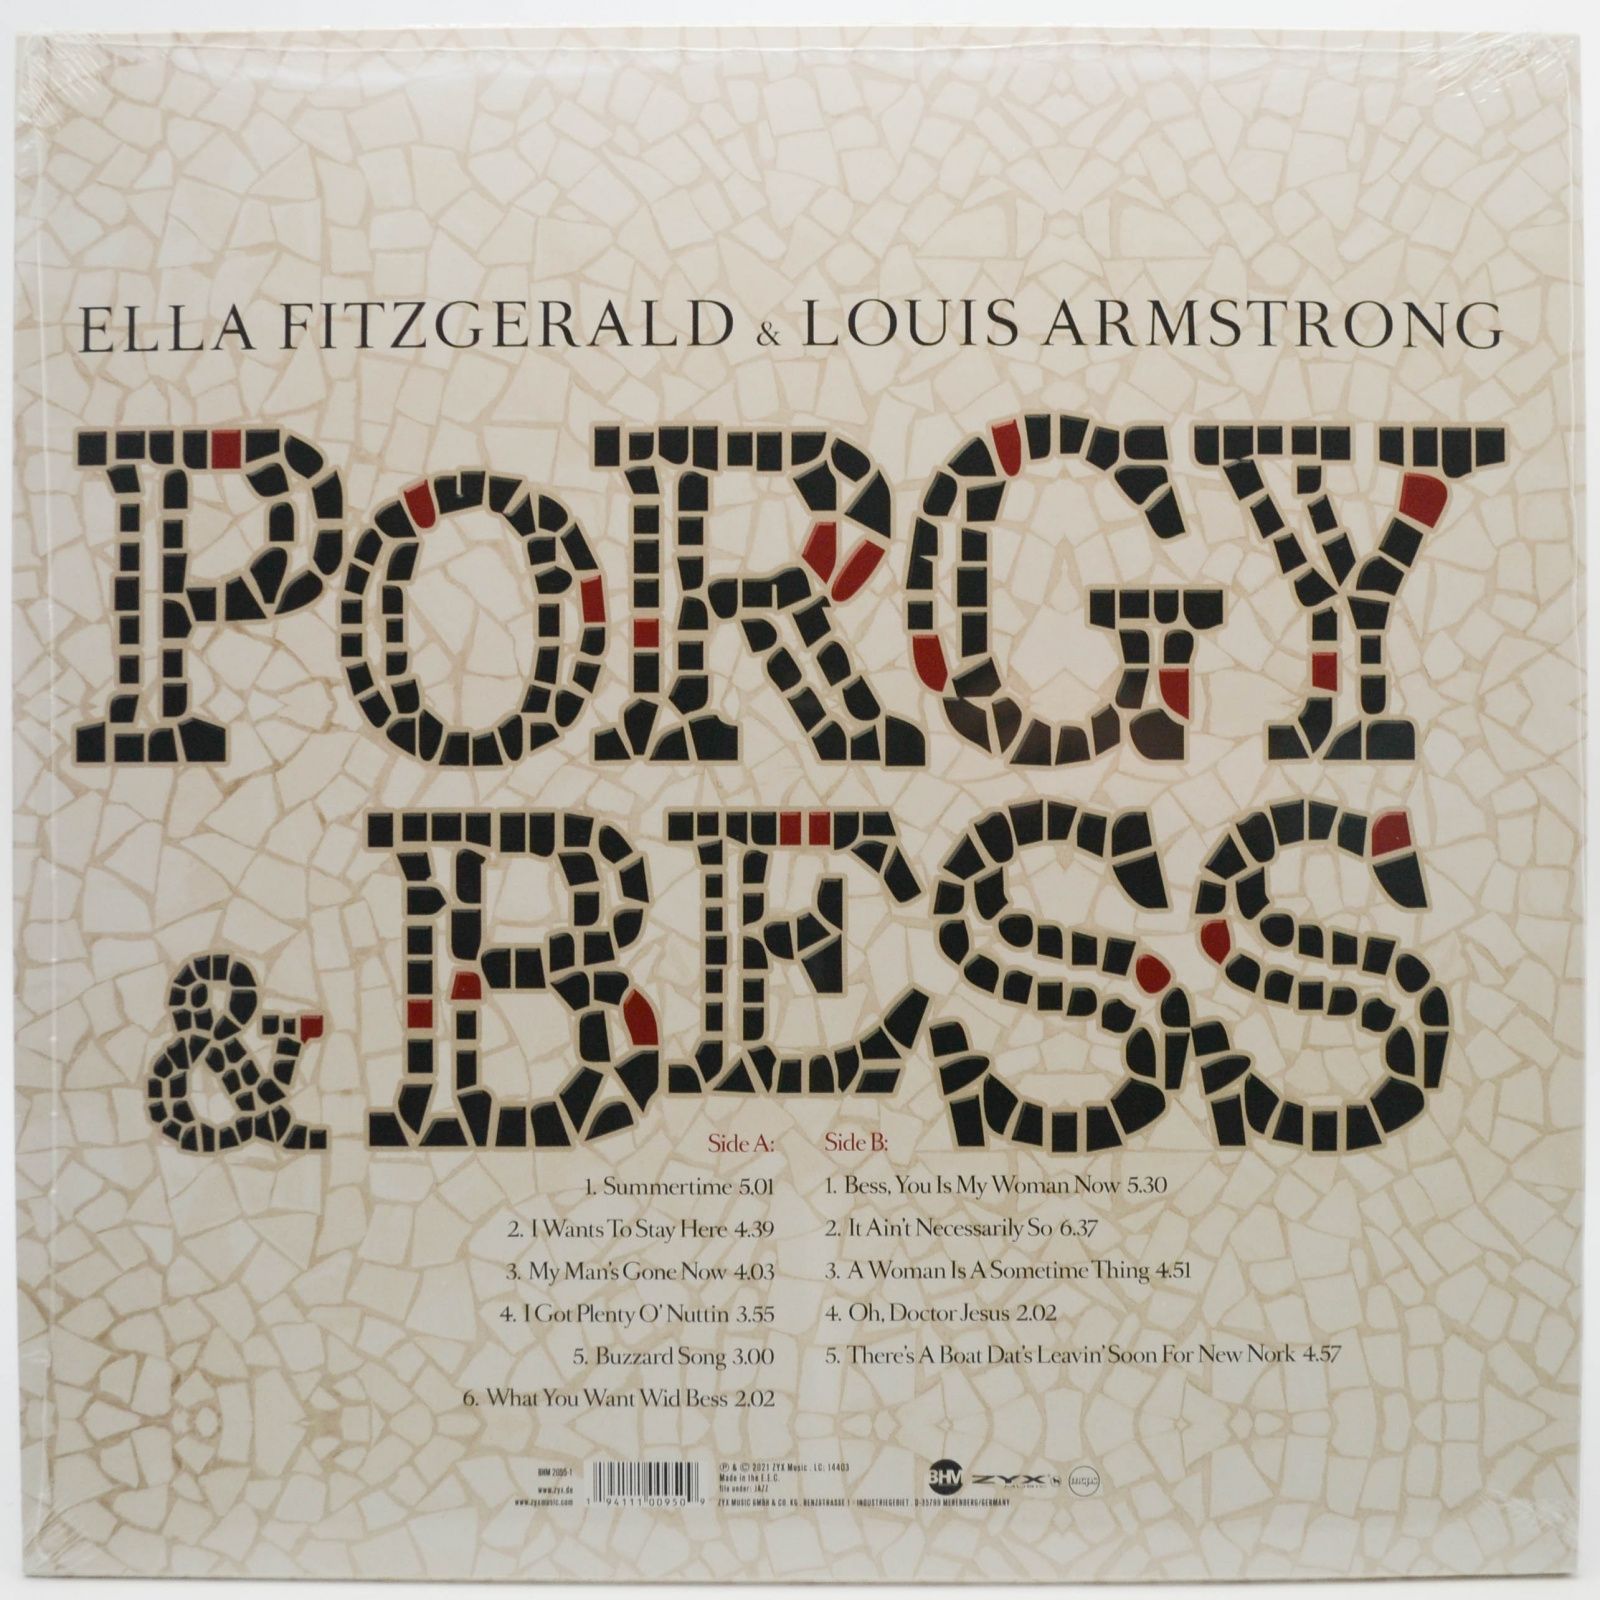 Ella Fitzgerald And Louis Armstrong — Porgy & Bess, 1959